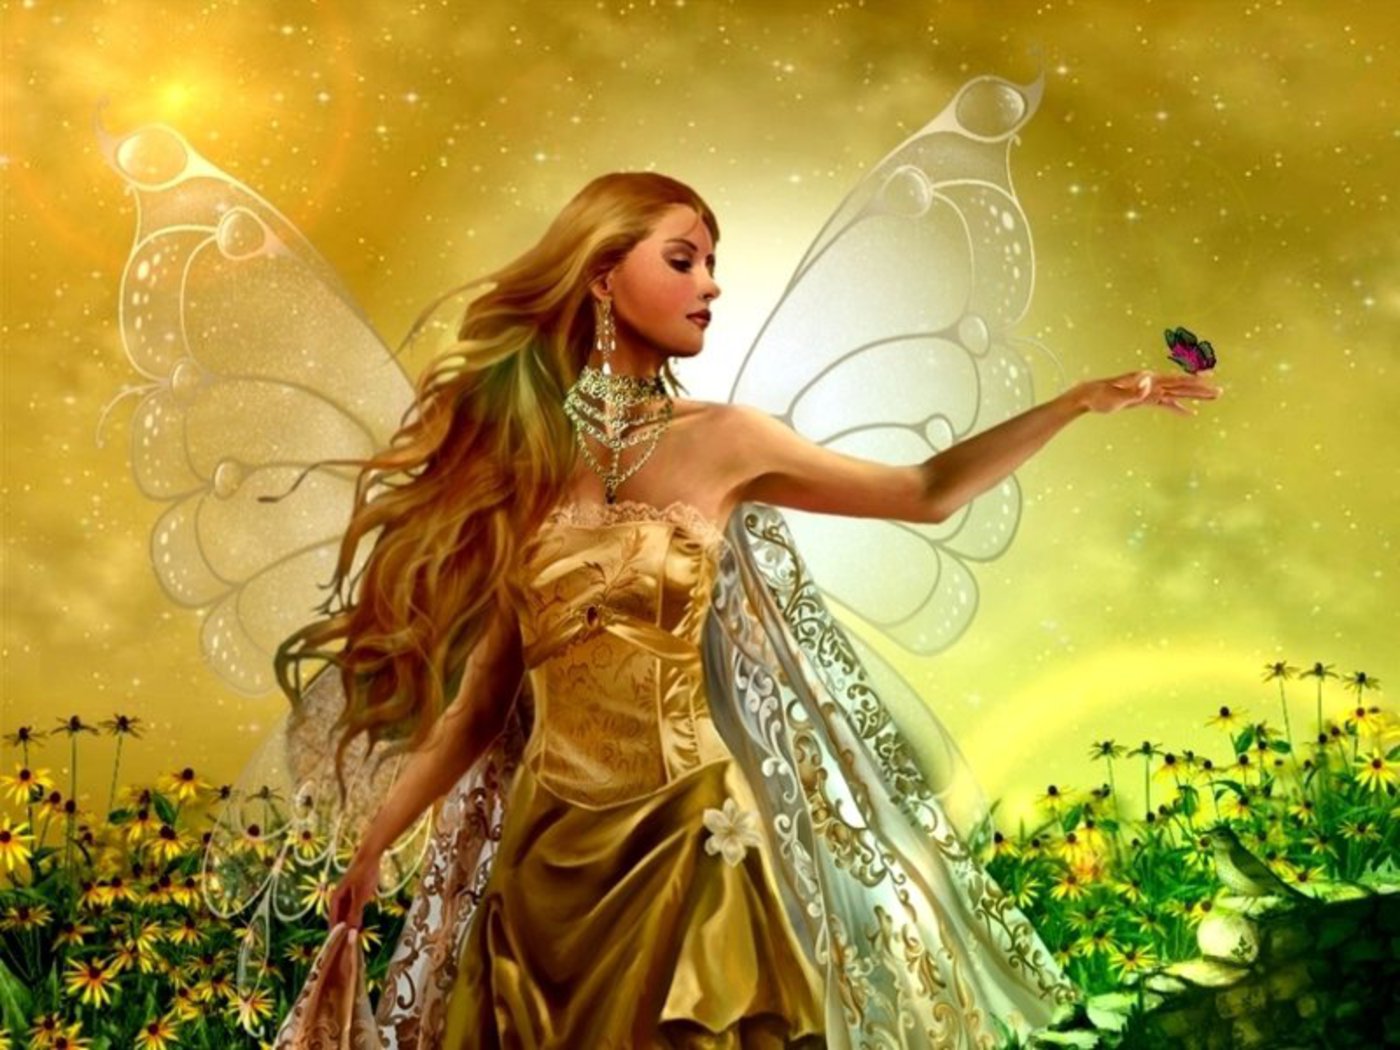 fairy and butterfly angel desktop wallpaper download fairy and